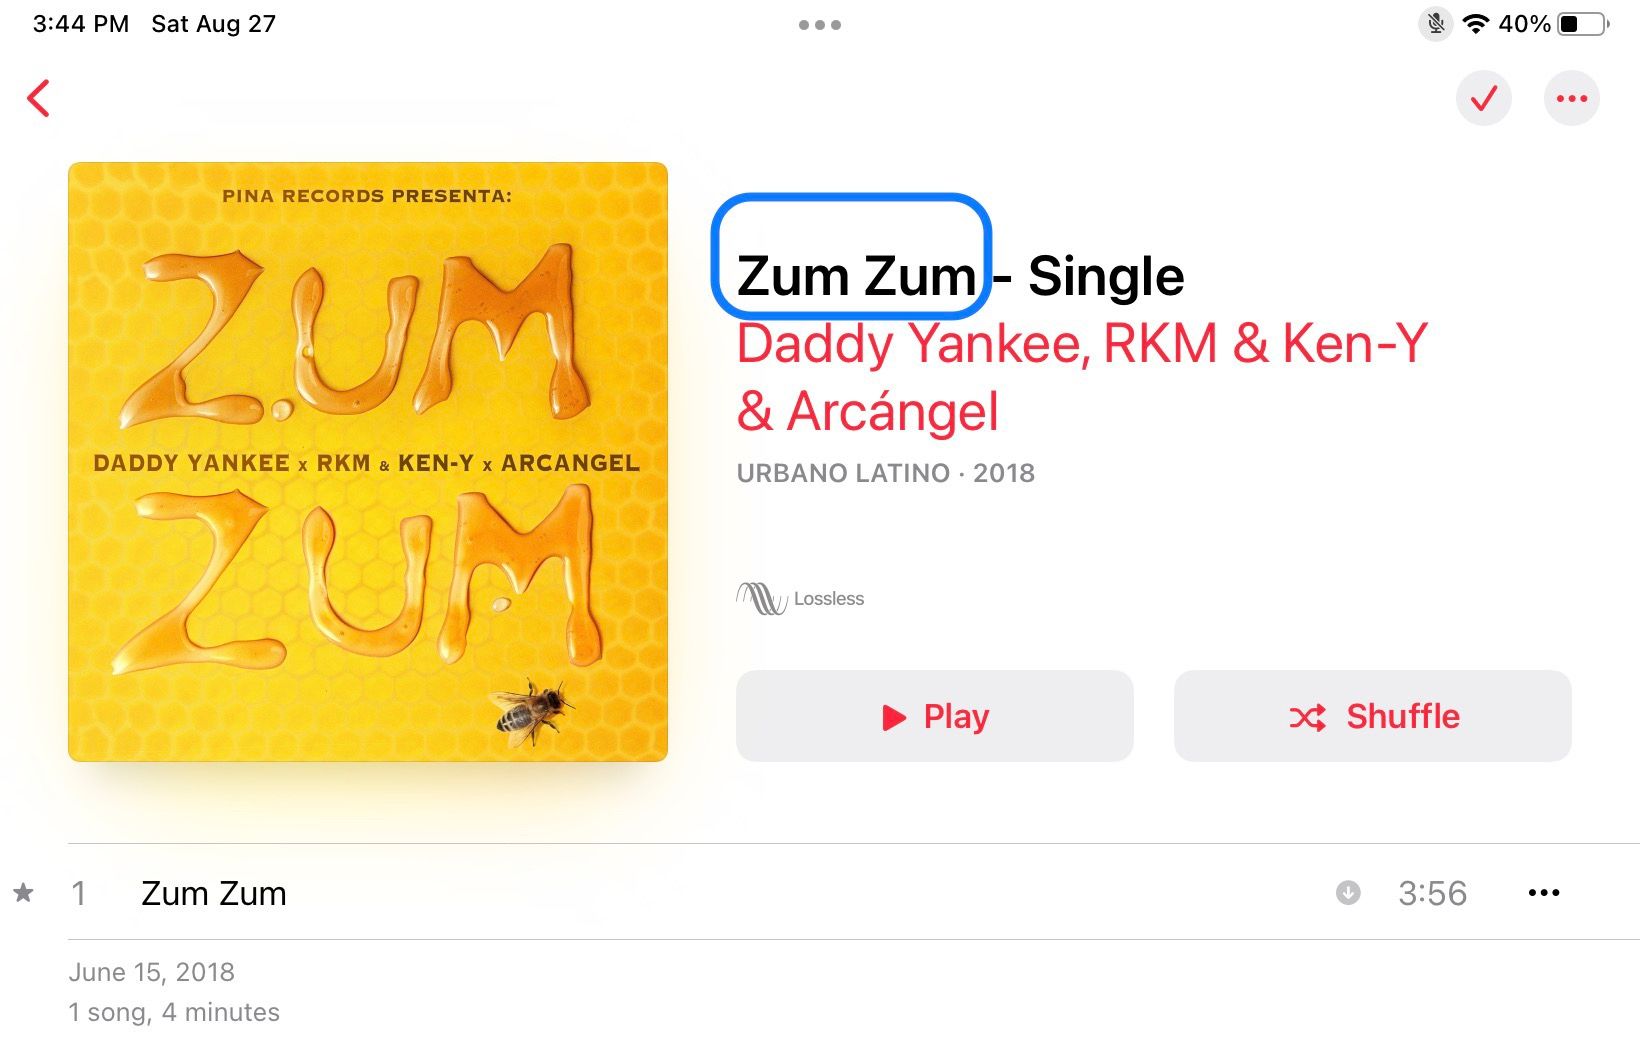 Song title letters with Zum Zum in capitals on yellow background noting it is a single released in 2018 in Urban Latino category 